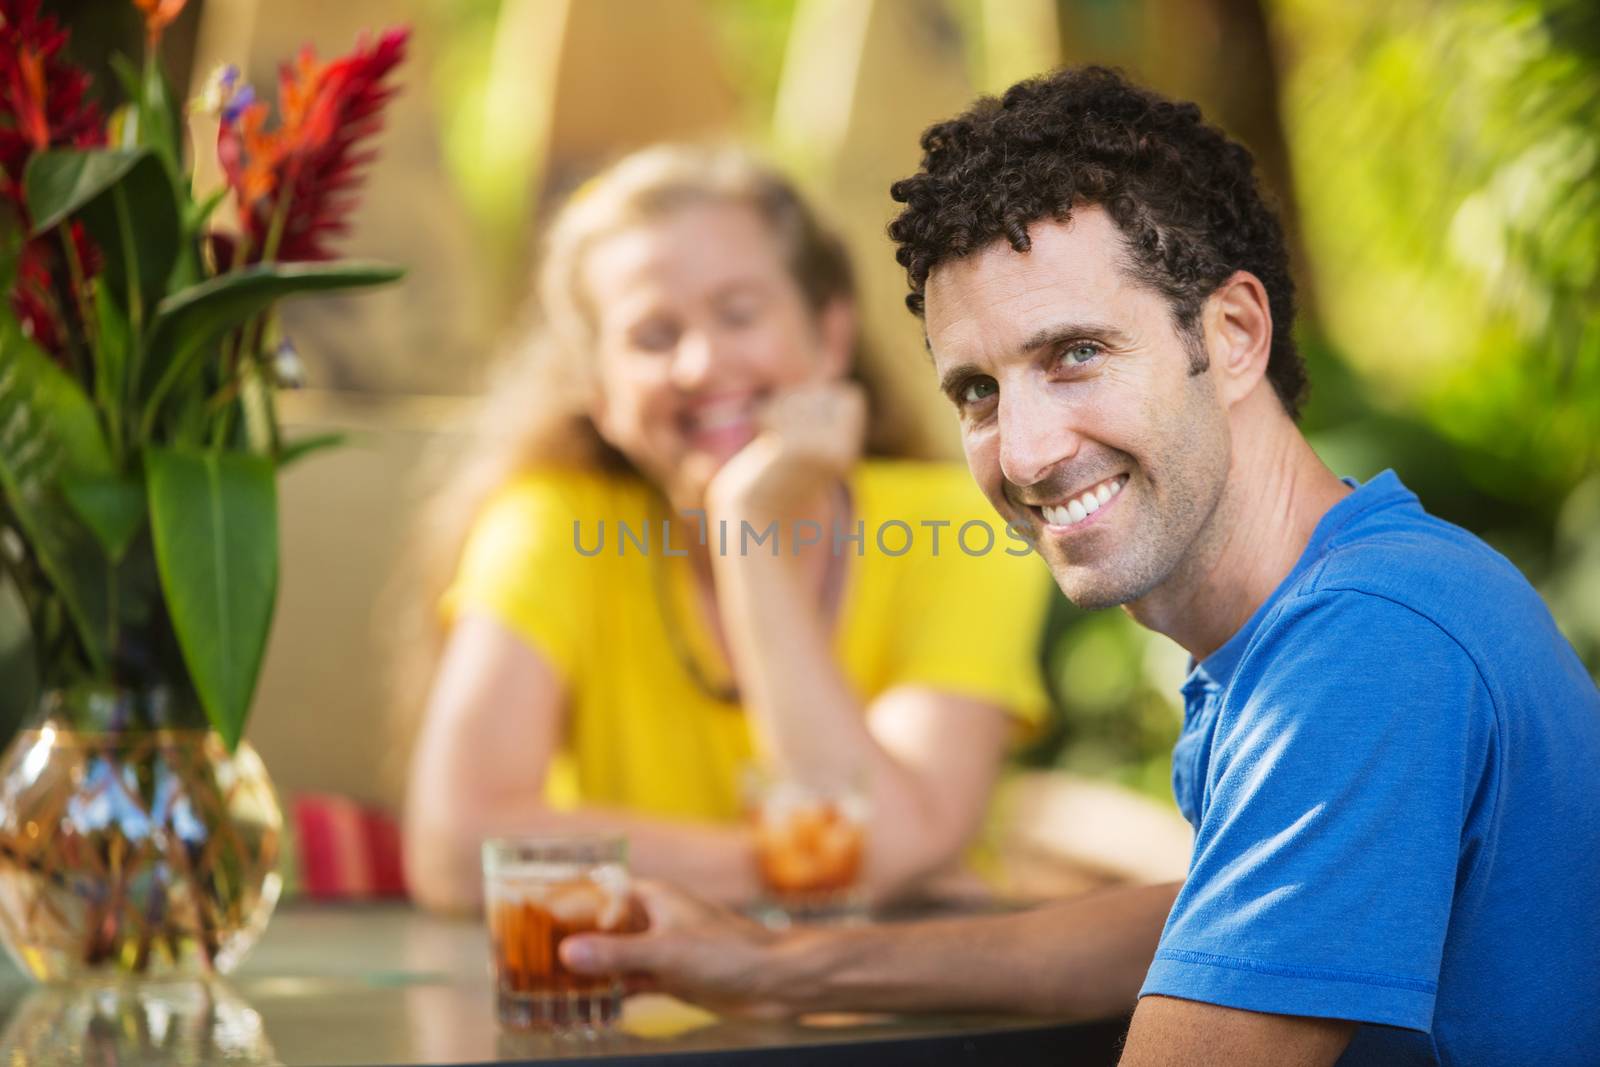 Smiling Man with Woman Outdoors by Creatista